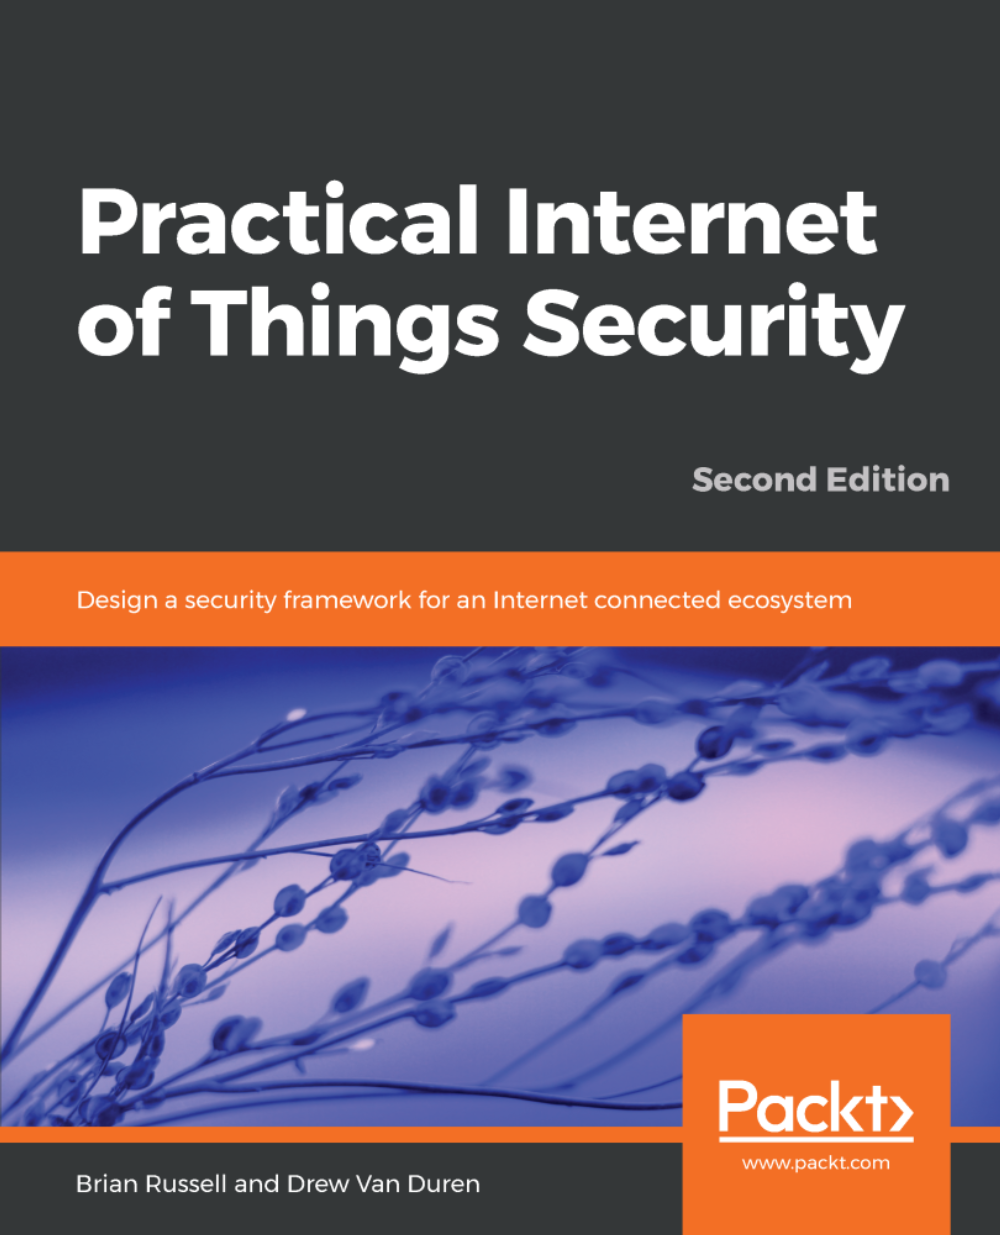 Practical Internet of Things Security: Design a security framework for an Internet connected ecosystem, Second Edition